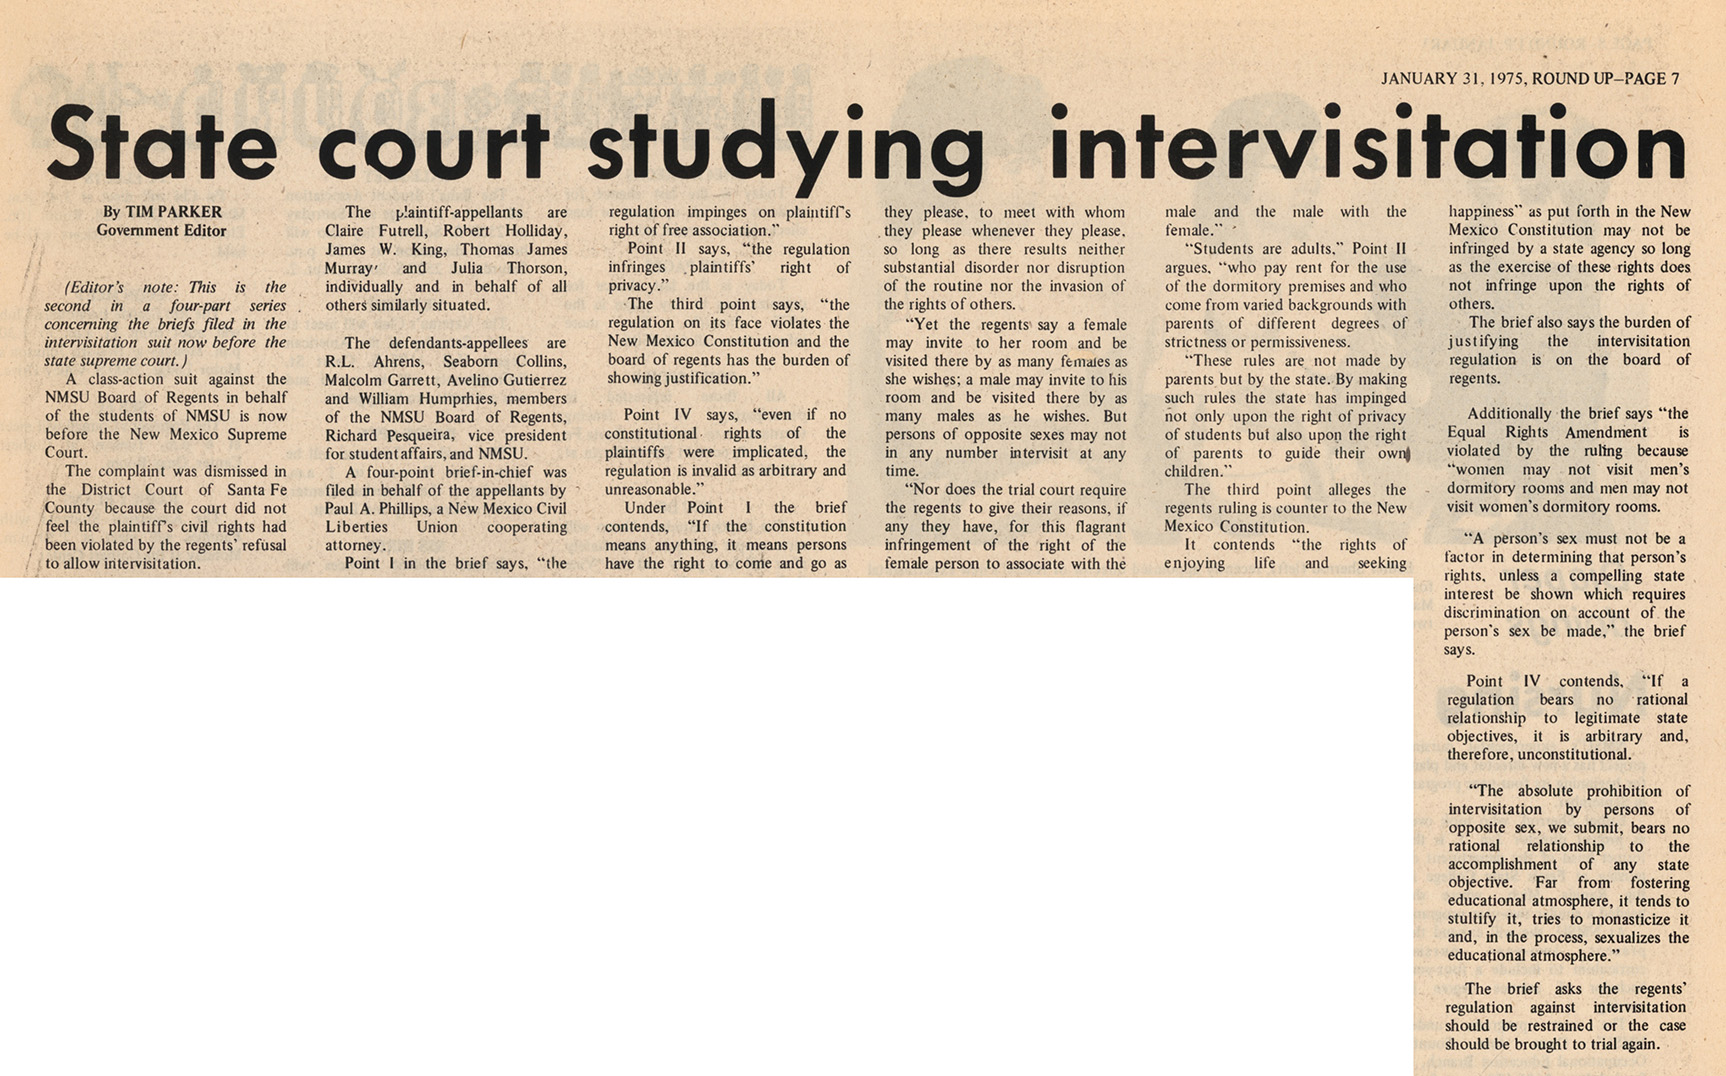 newspaper clipping of article titled State court studying intervisitation